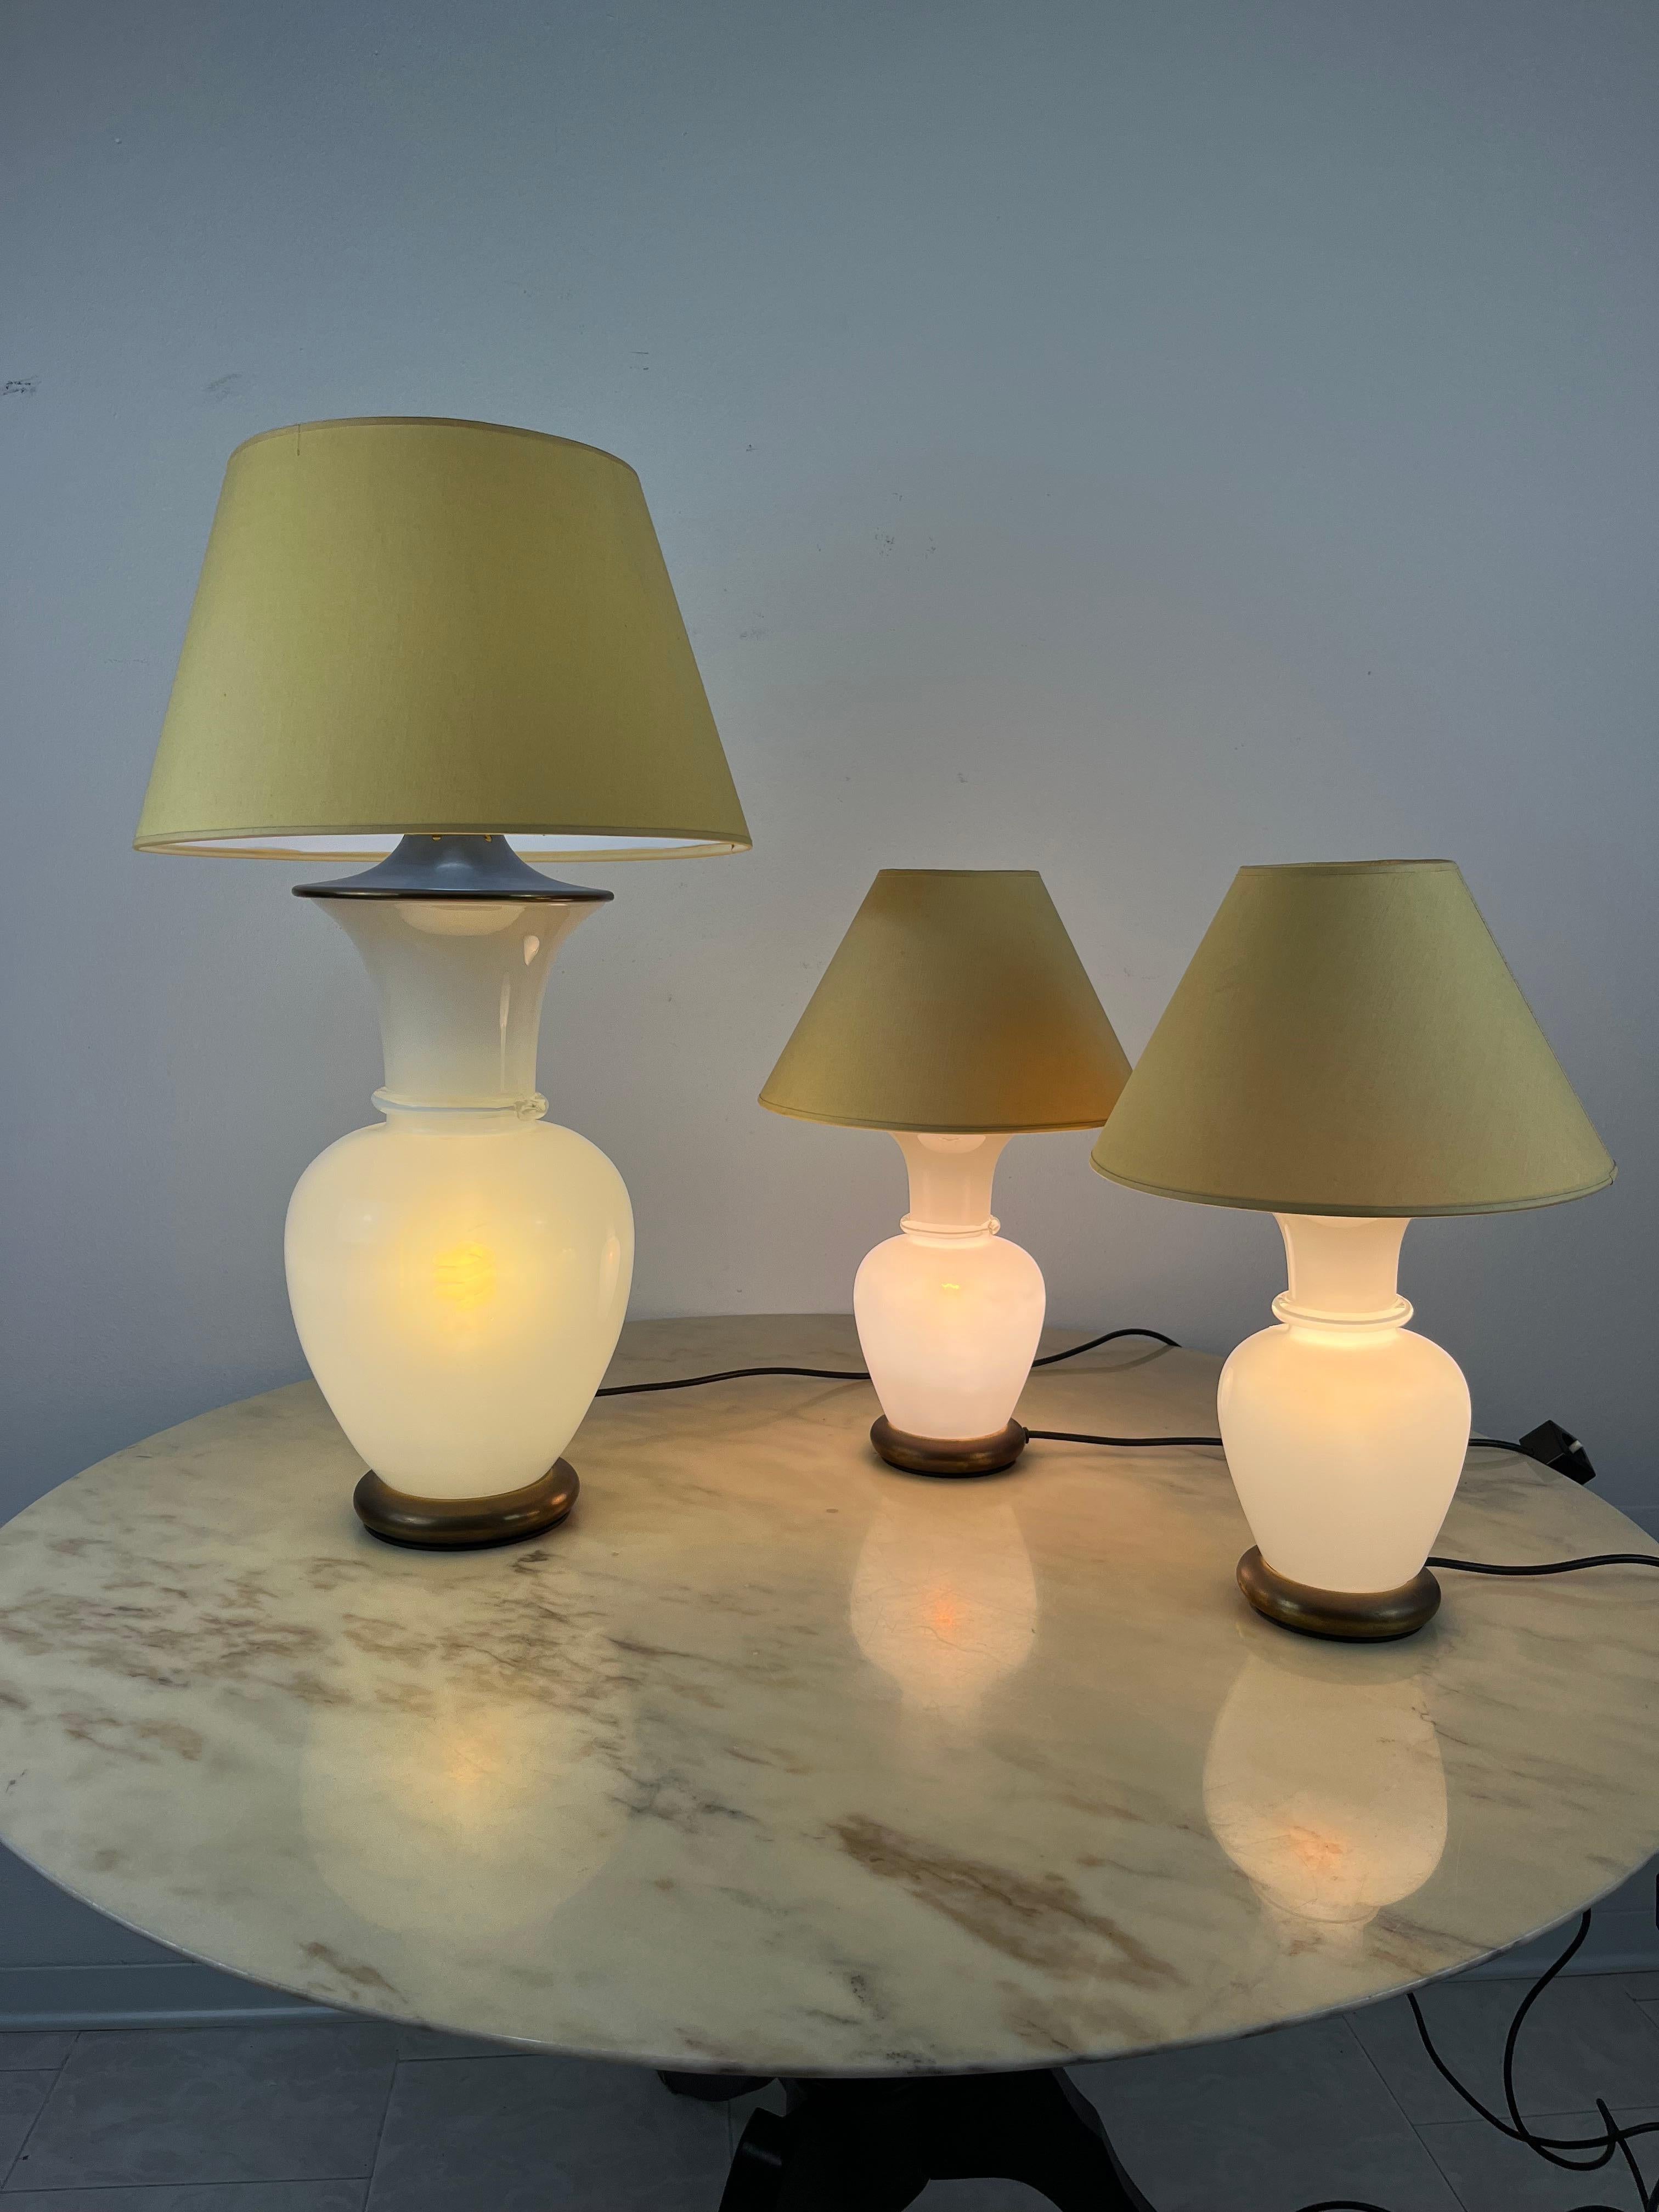 Set of 3 Murano glass and brass table lamps, F. Fabbian, Italy, 1970s
Found in a noble apartment.
Very beautiful and particular because they have a double switch. Each has a lamp inside the pot-bellied part and one in the lampshade housing. The